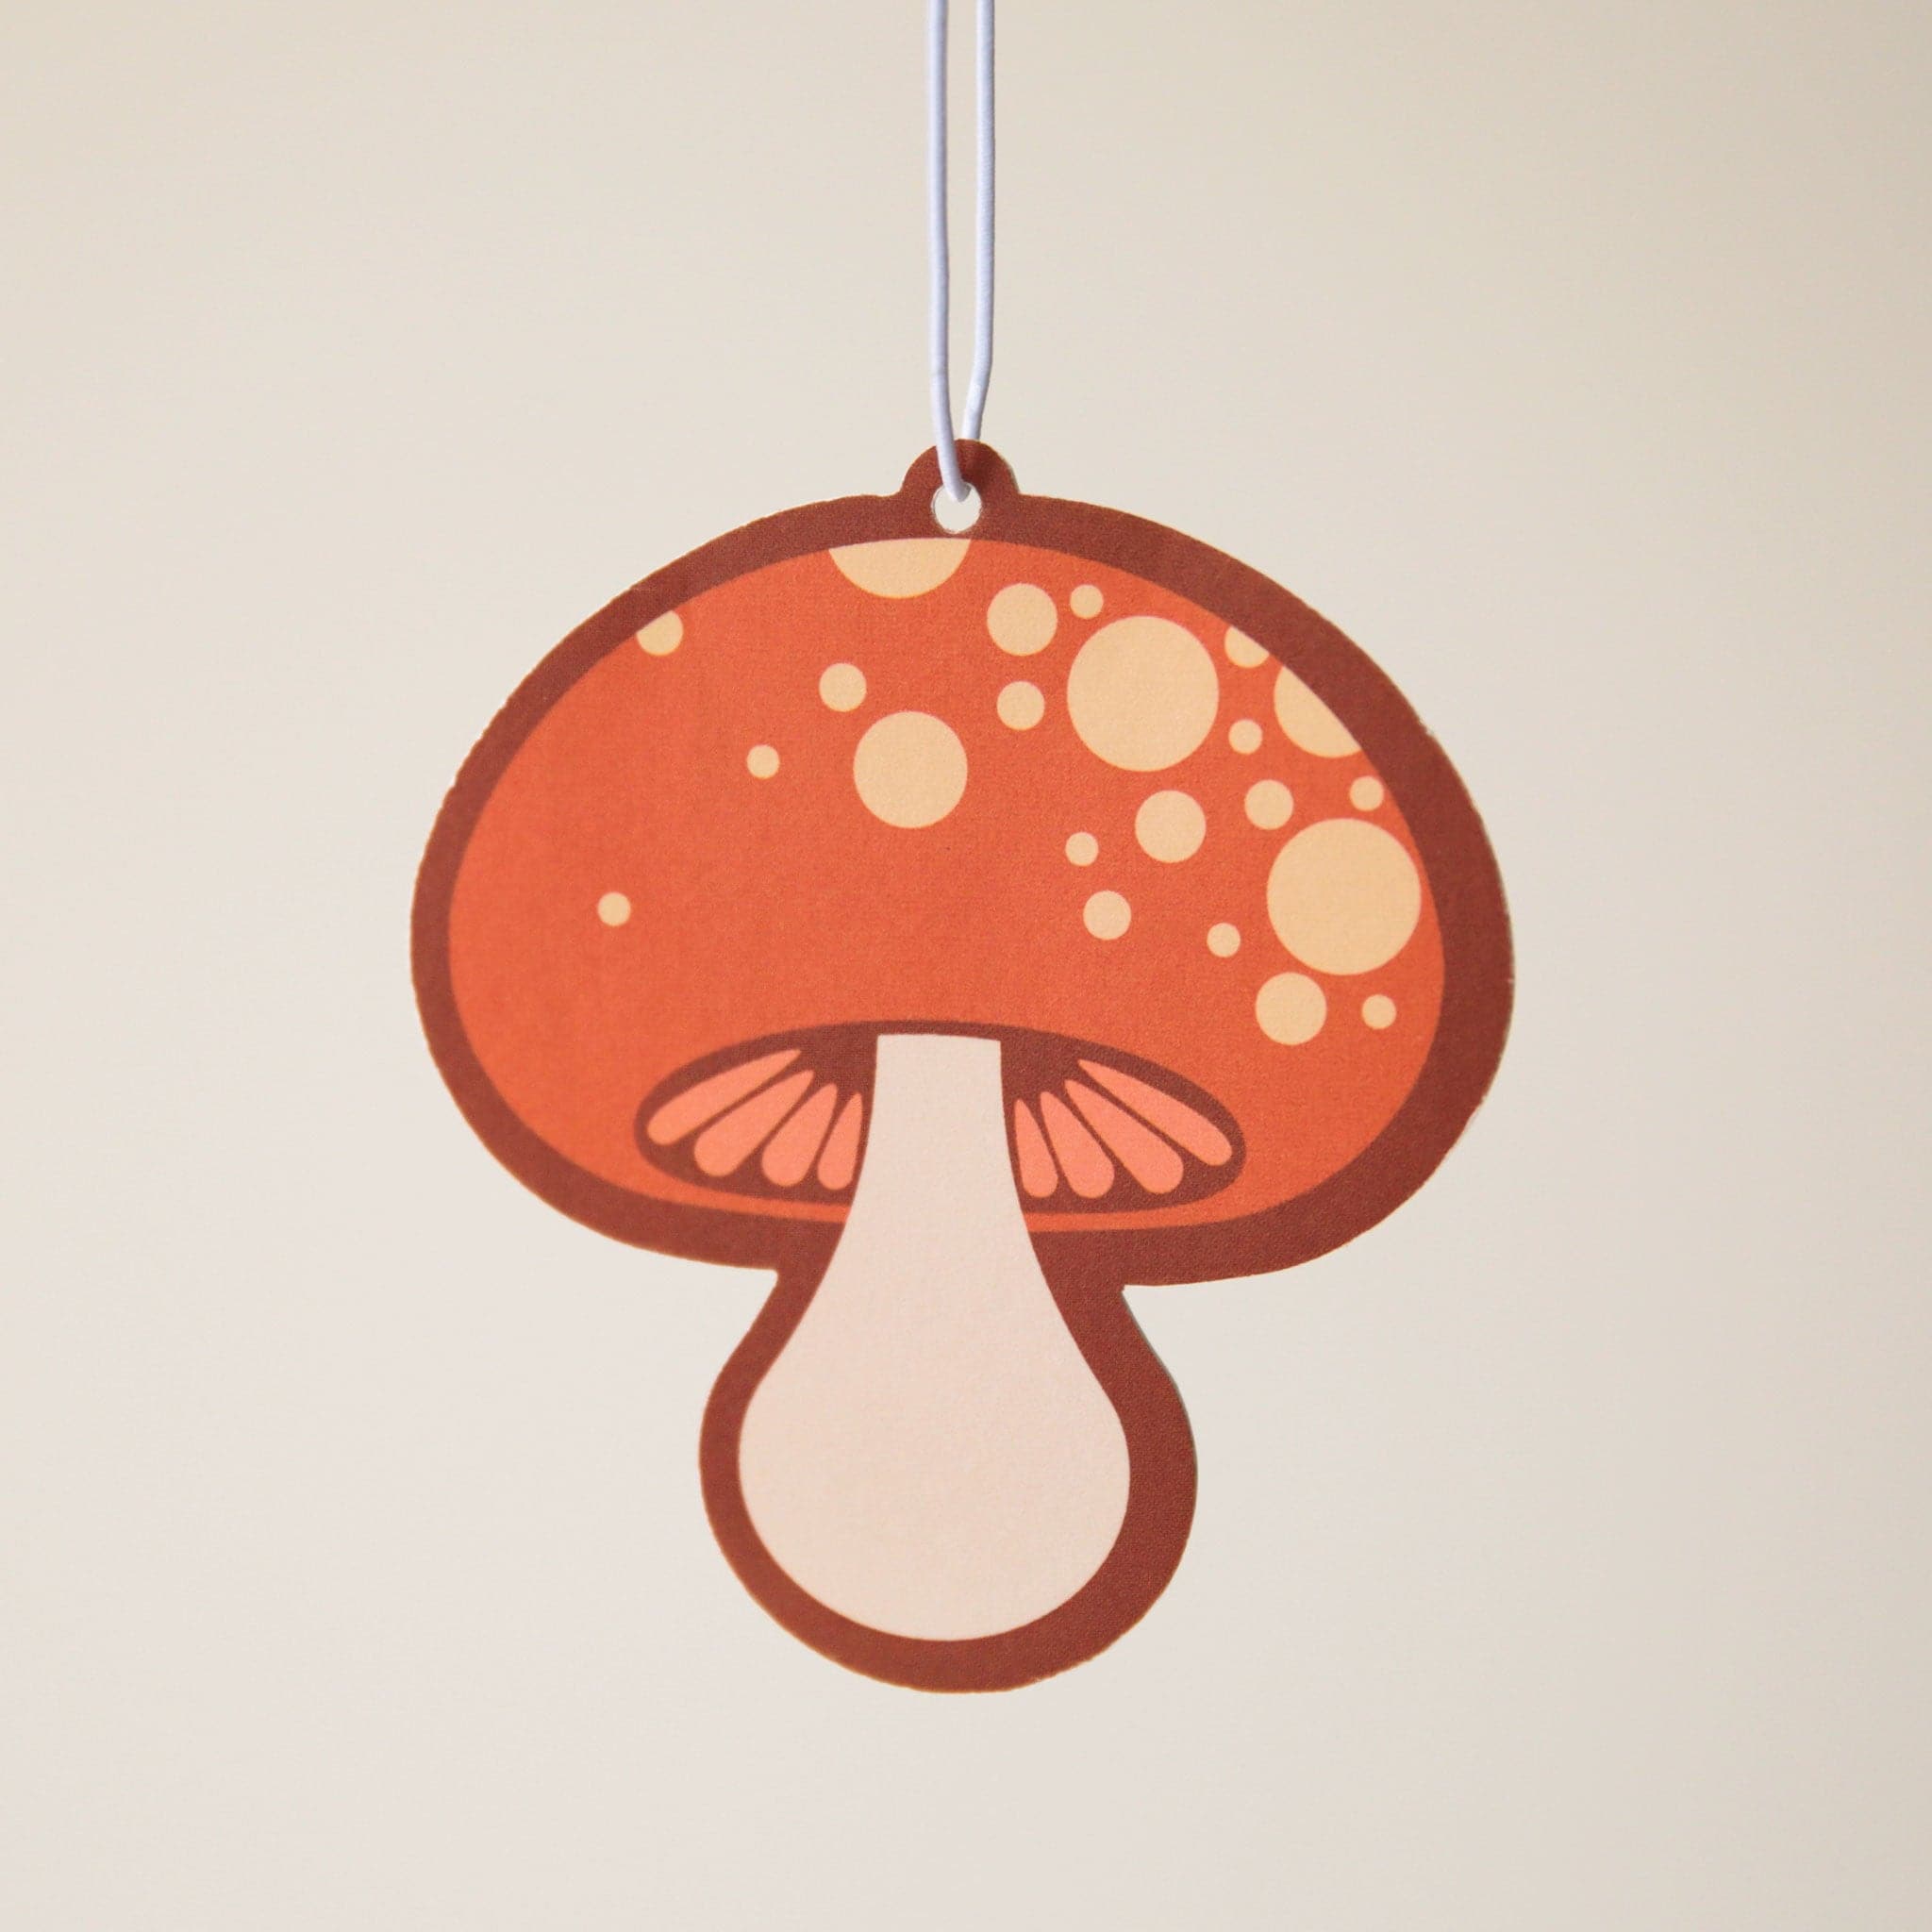 A brown-orange mushroom shaped air freshener with small dots on the top.